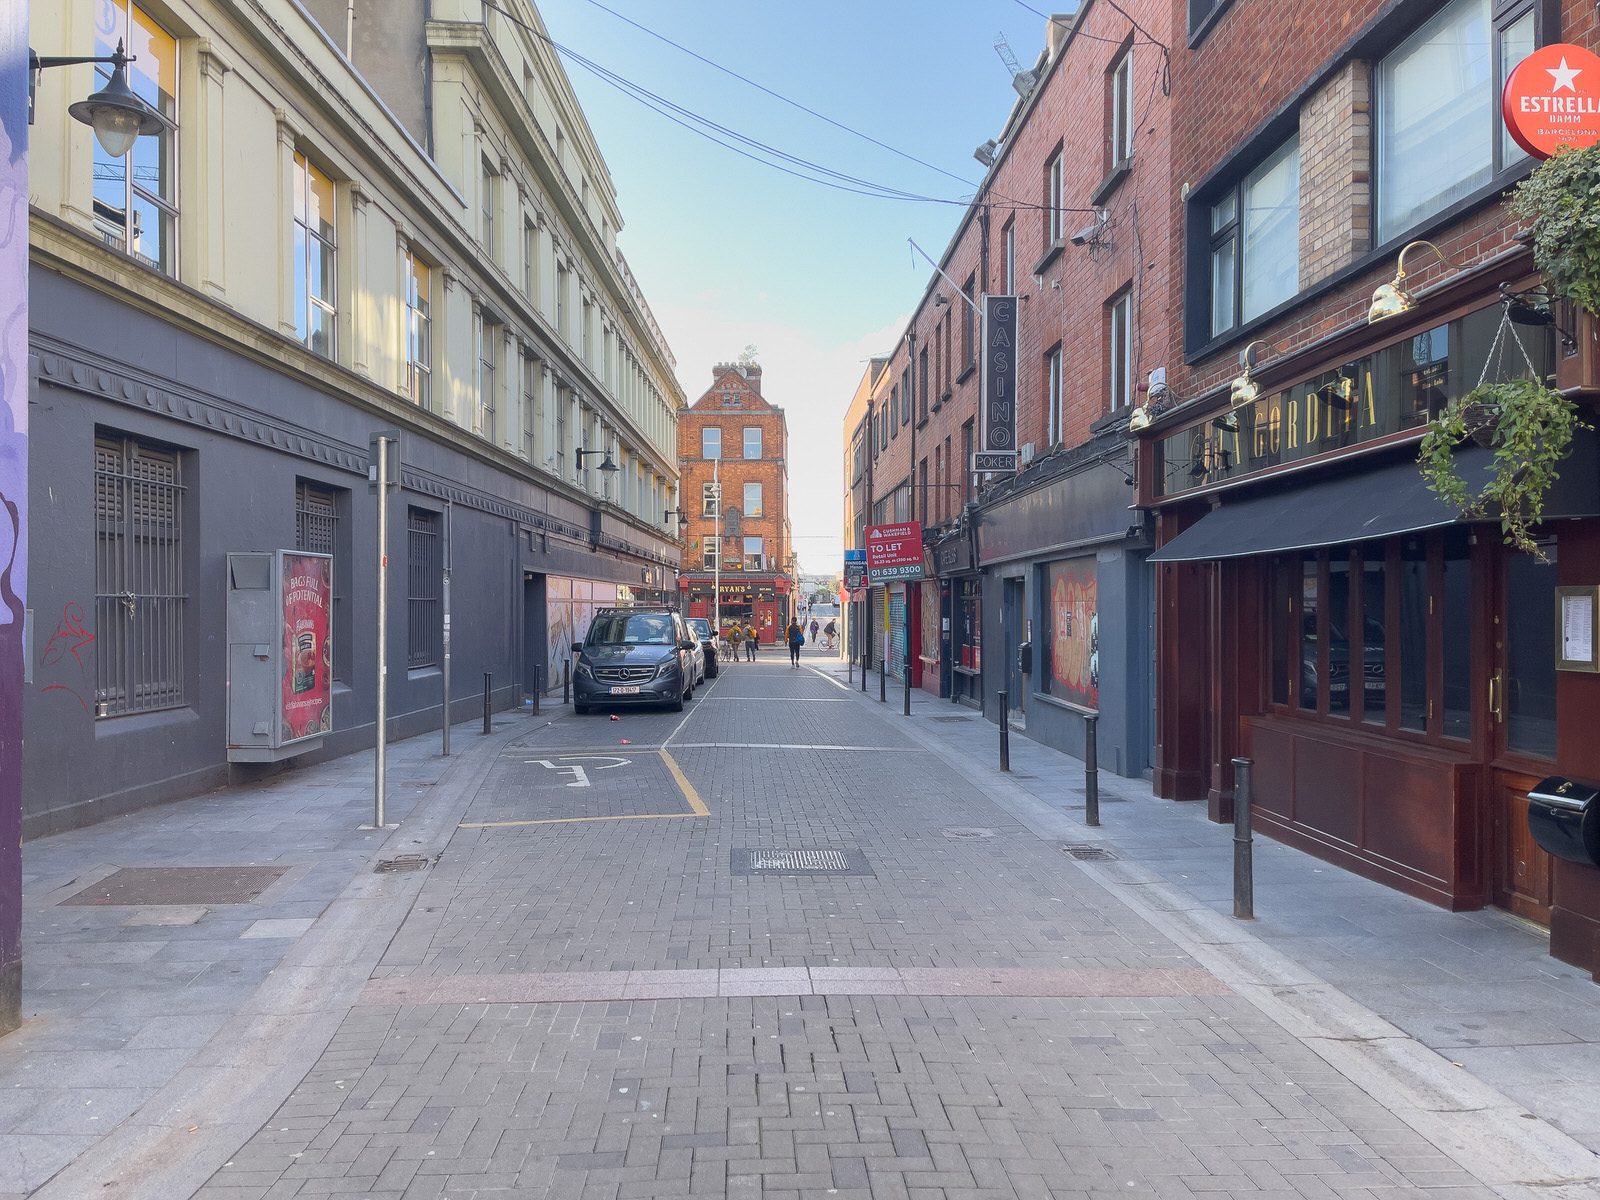 MONTAGUE STREET AND LANE [CONNECTING HARCOURT STREET AND WEXFORD STREET]-224409-1